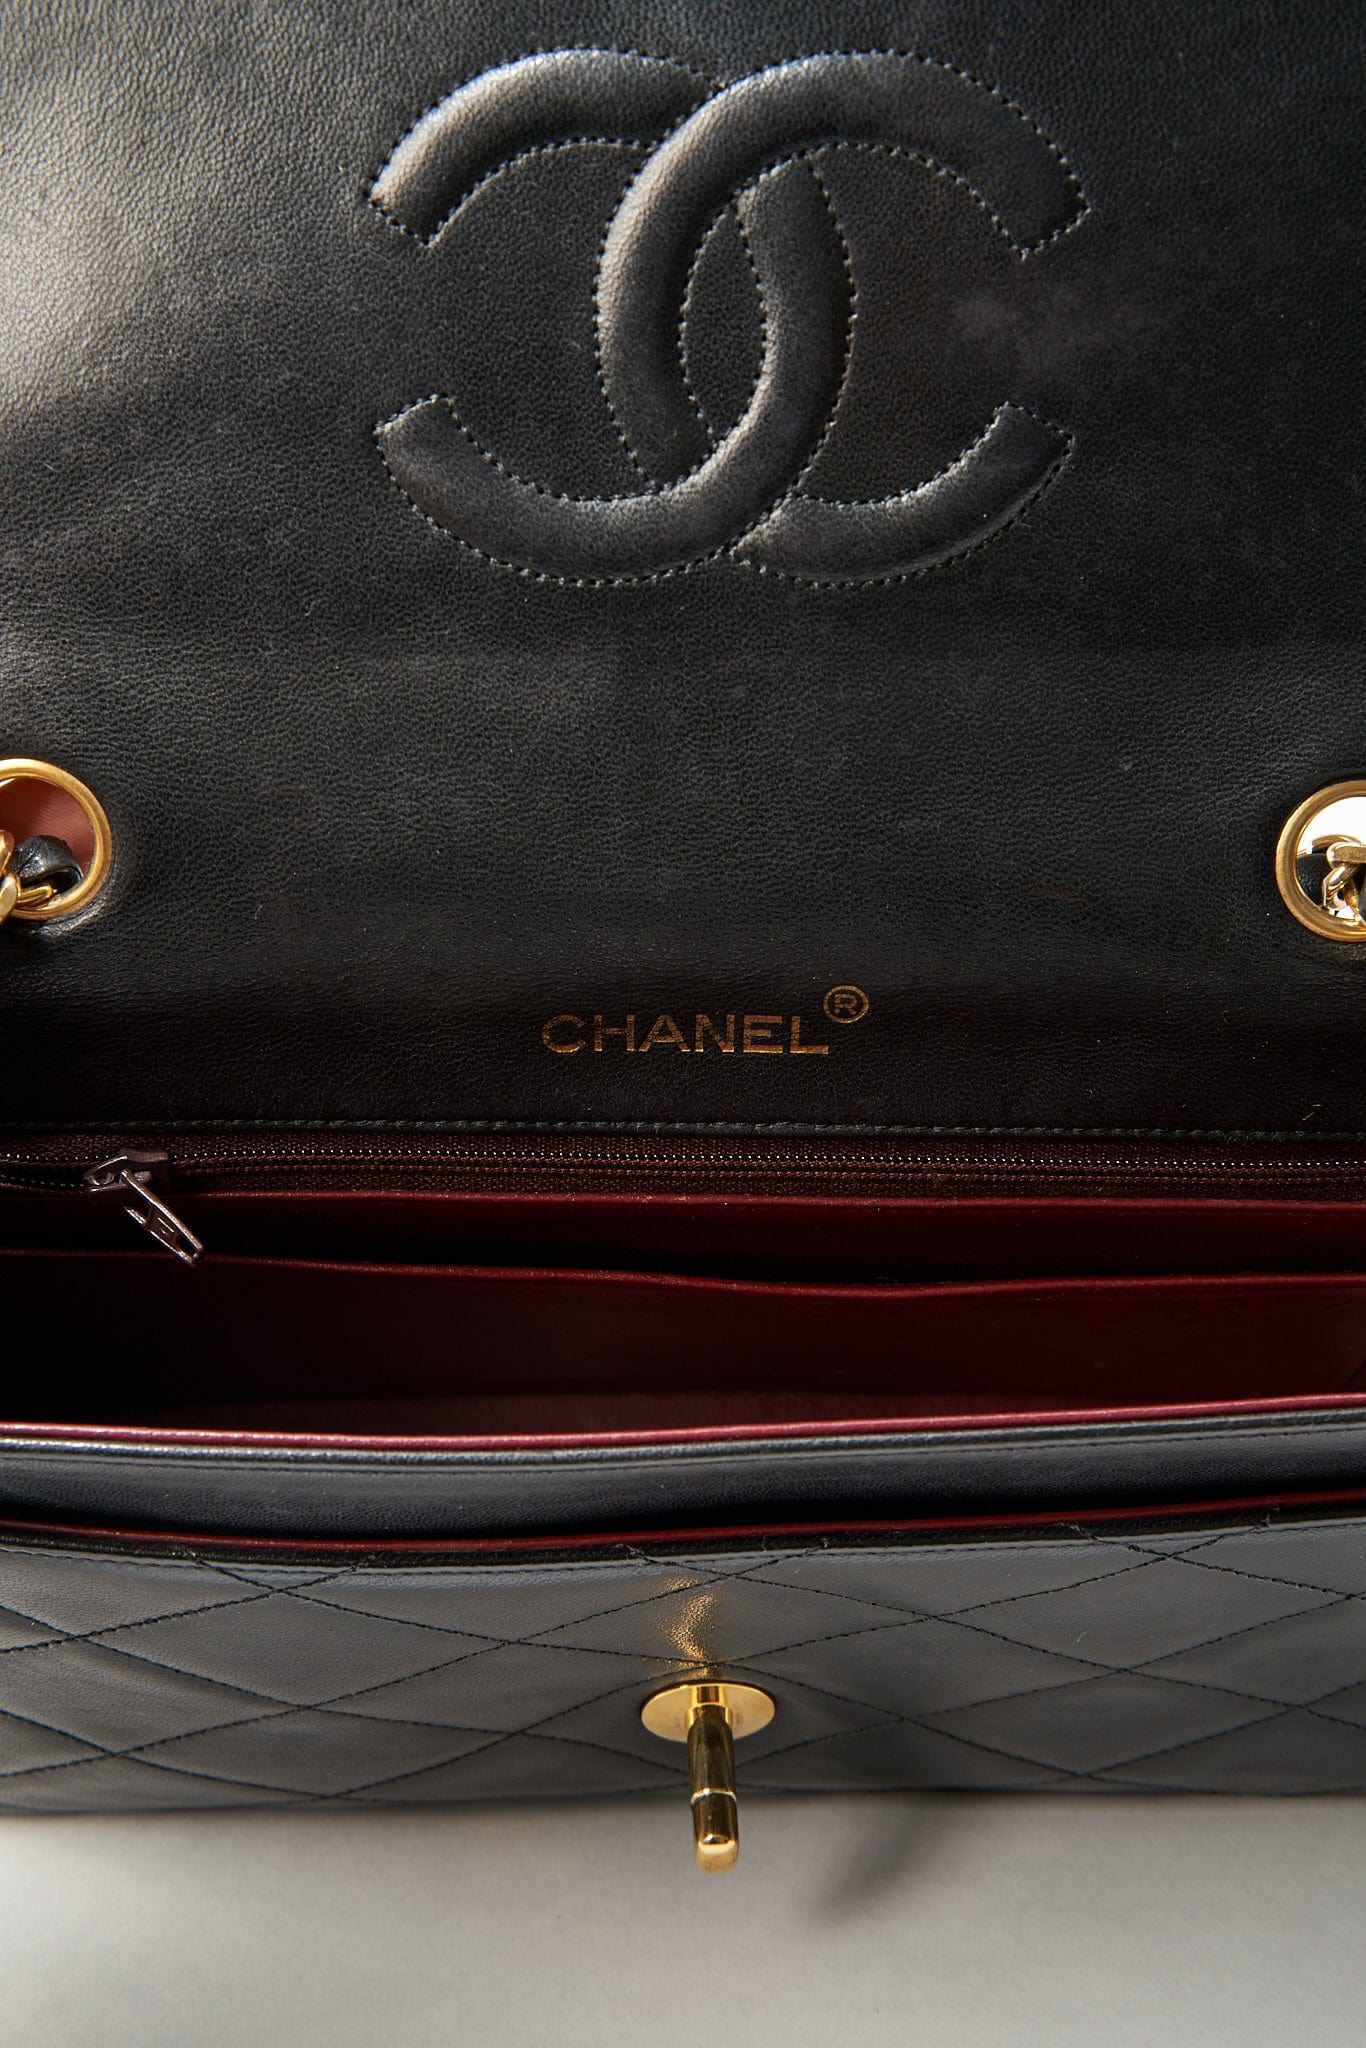 Chanel Vintage Single Flap with 24k gold plated hardware and V design